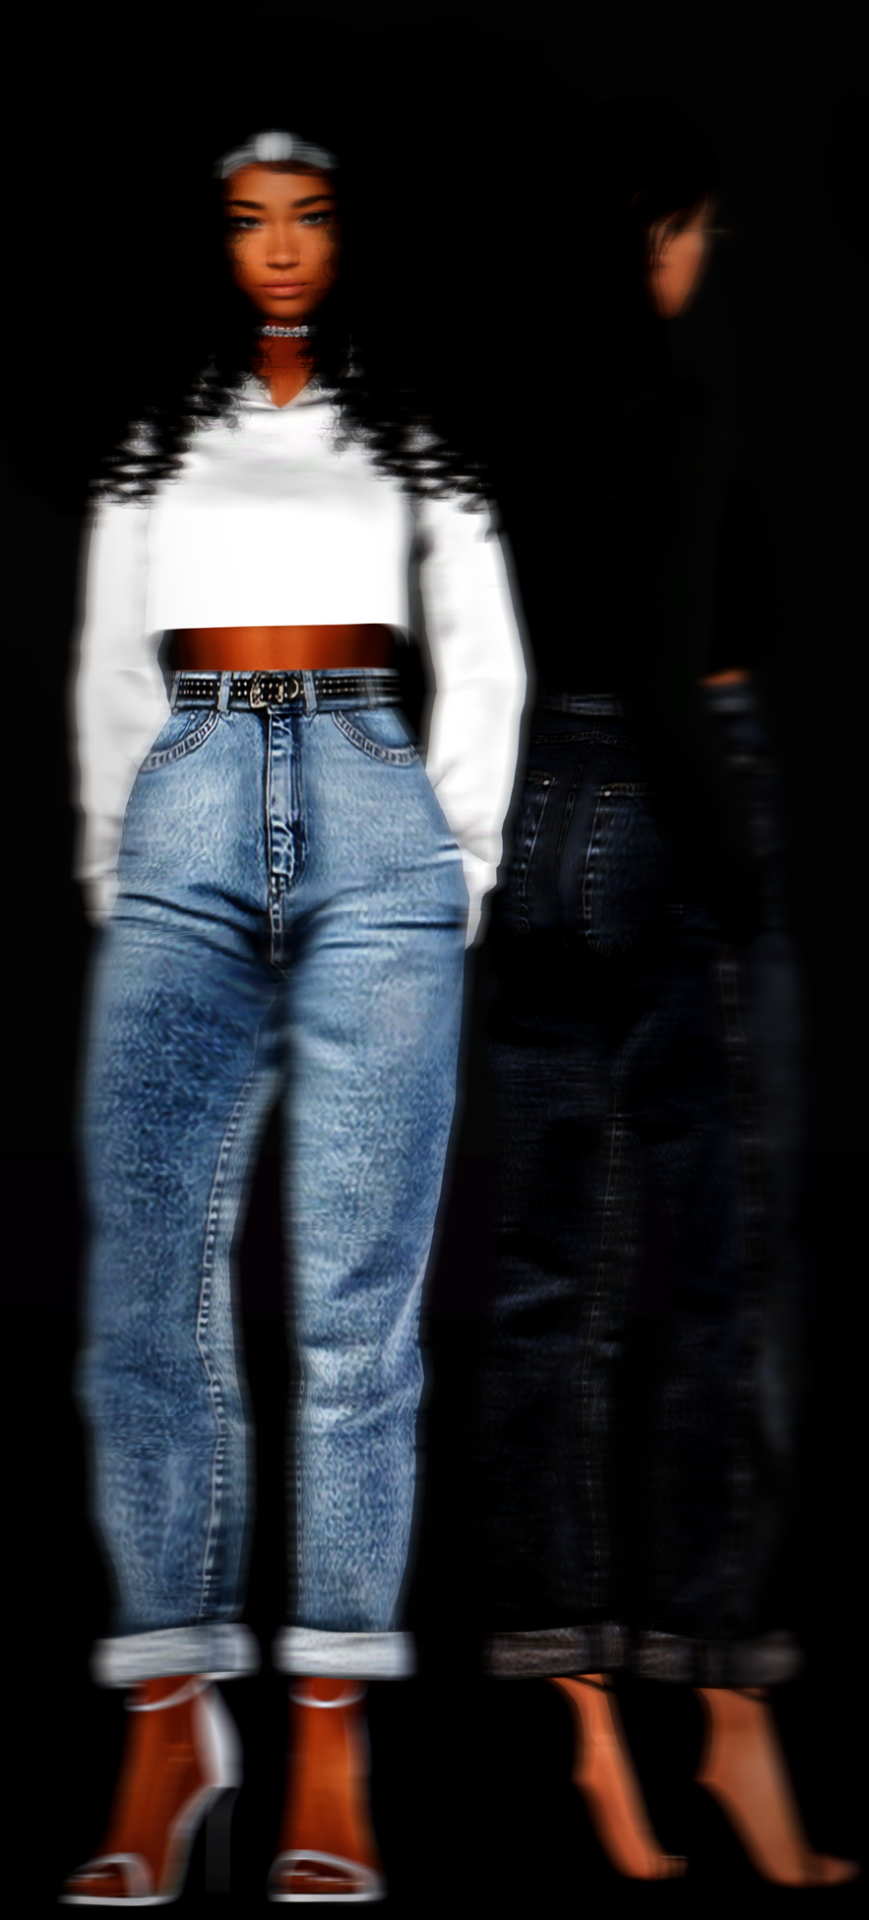 Savage Sims Milf Jeans Converted To Sims 3• All credit goes to @savage-sims• These are high waist pants so they may not go well with longer tops• They have morphs• I included 17 designs• 2048x2048 Textures• Original Sims 4 Post...